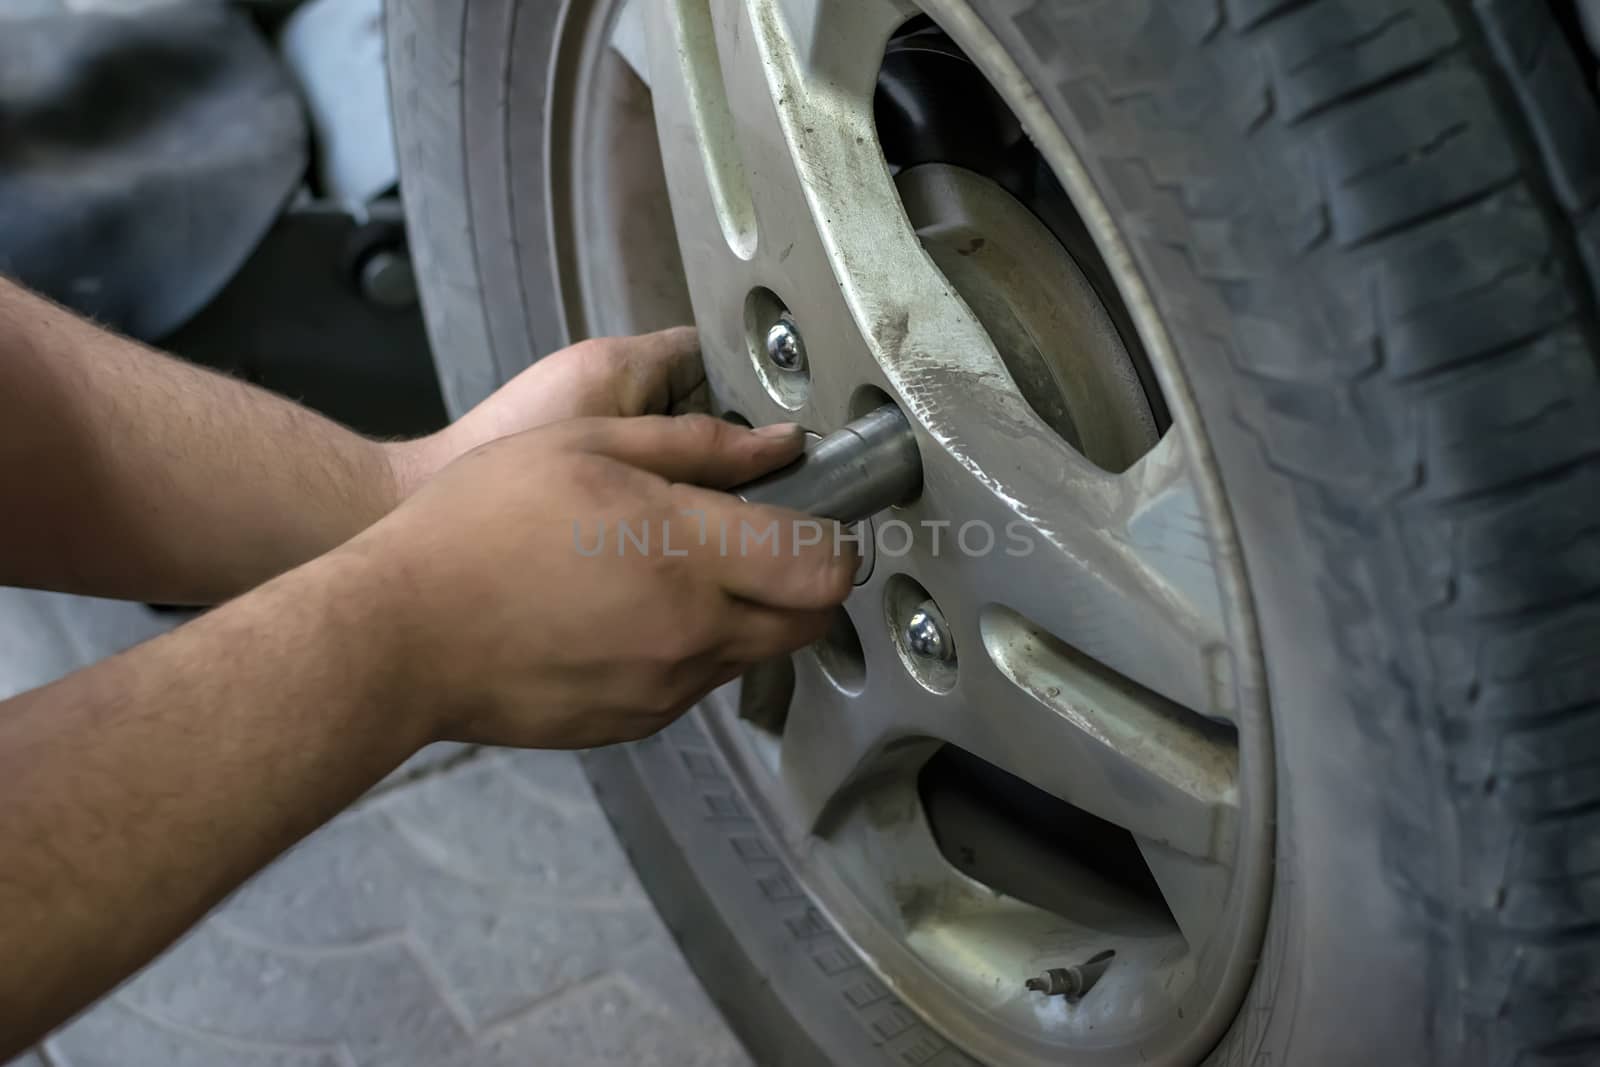 Human hands screw nuts in the wheel of the car by jk3030